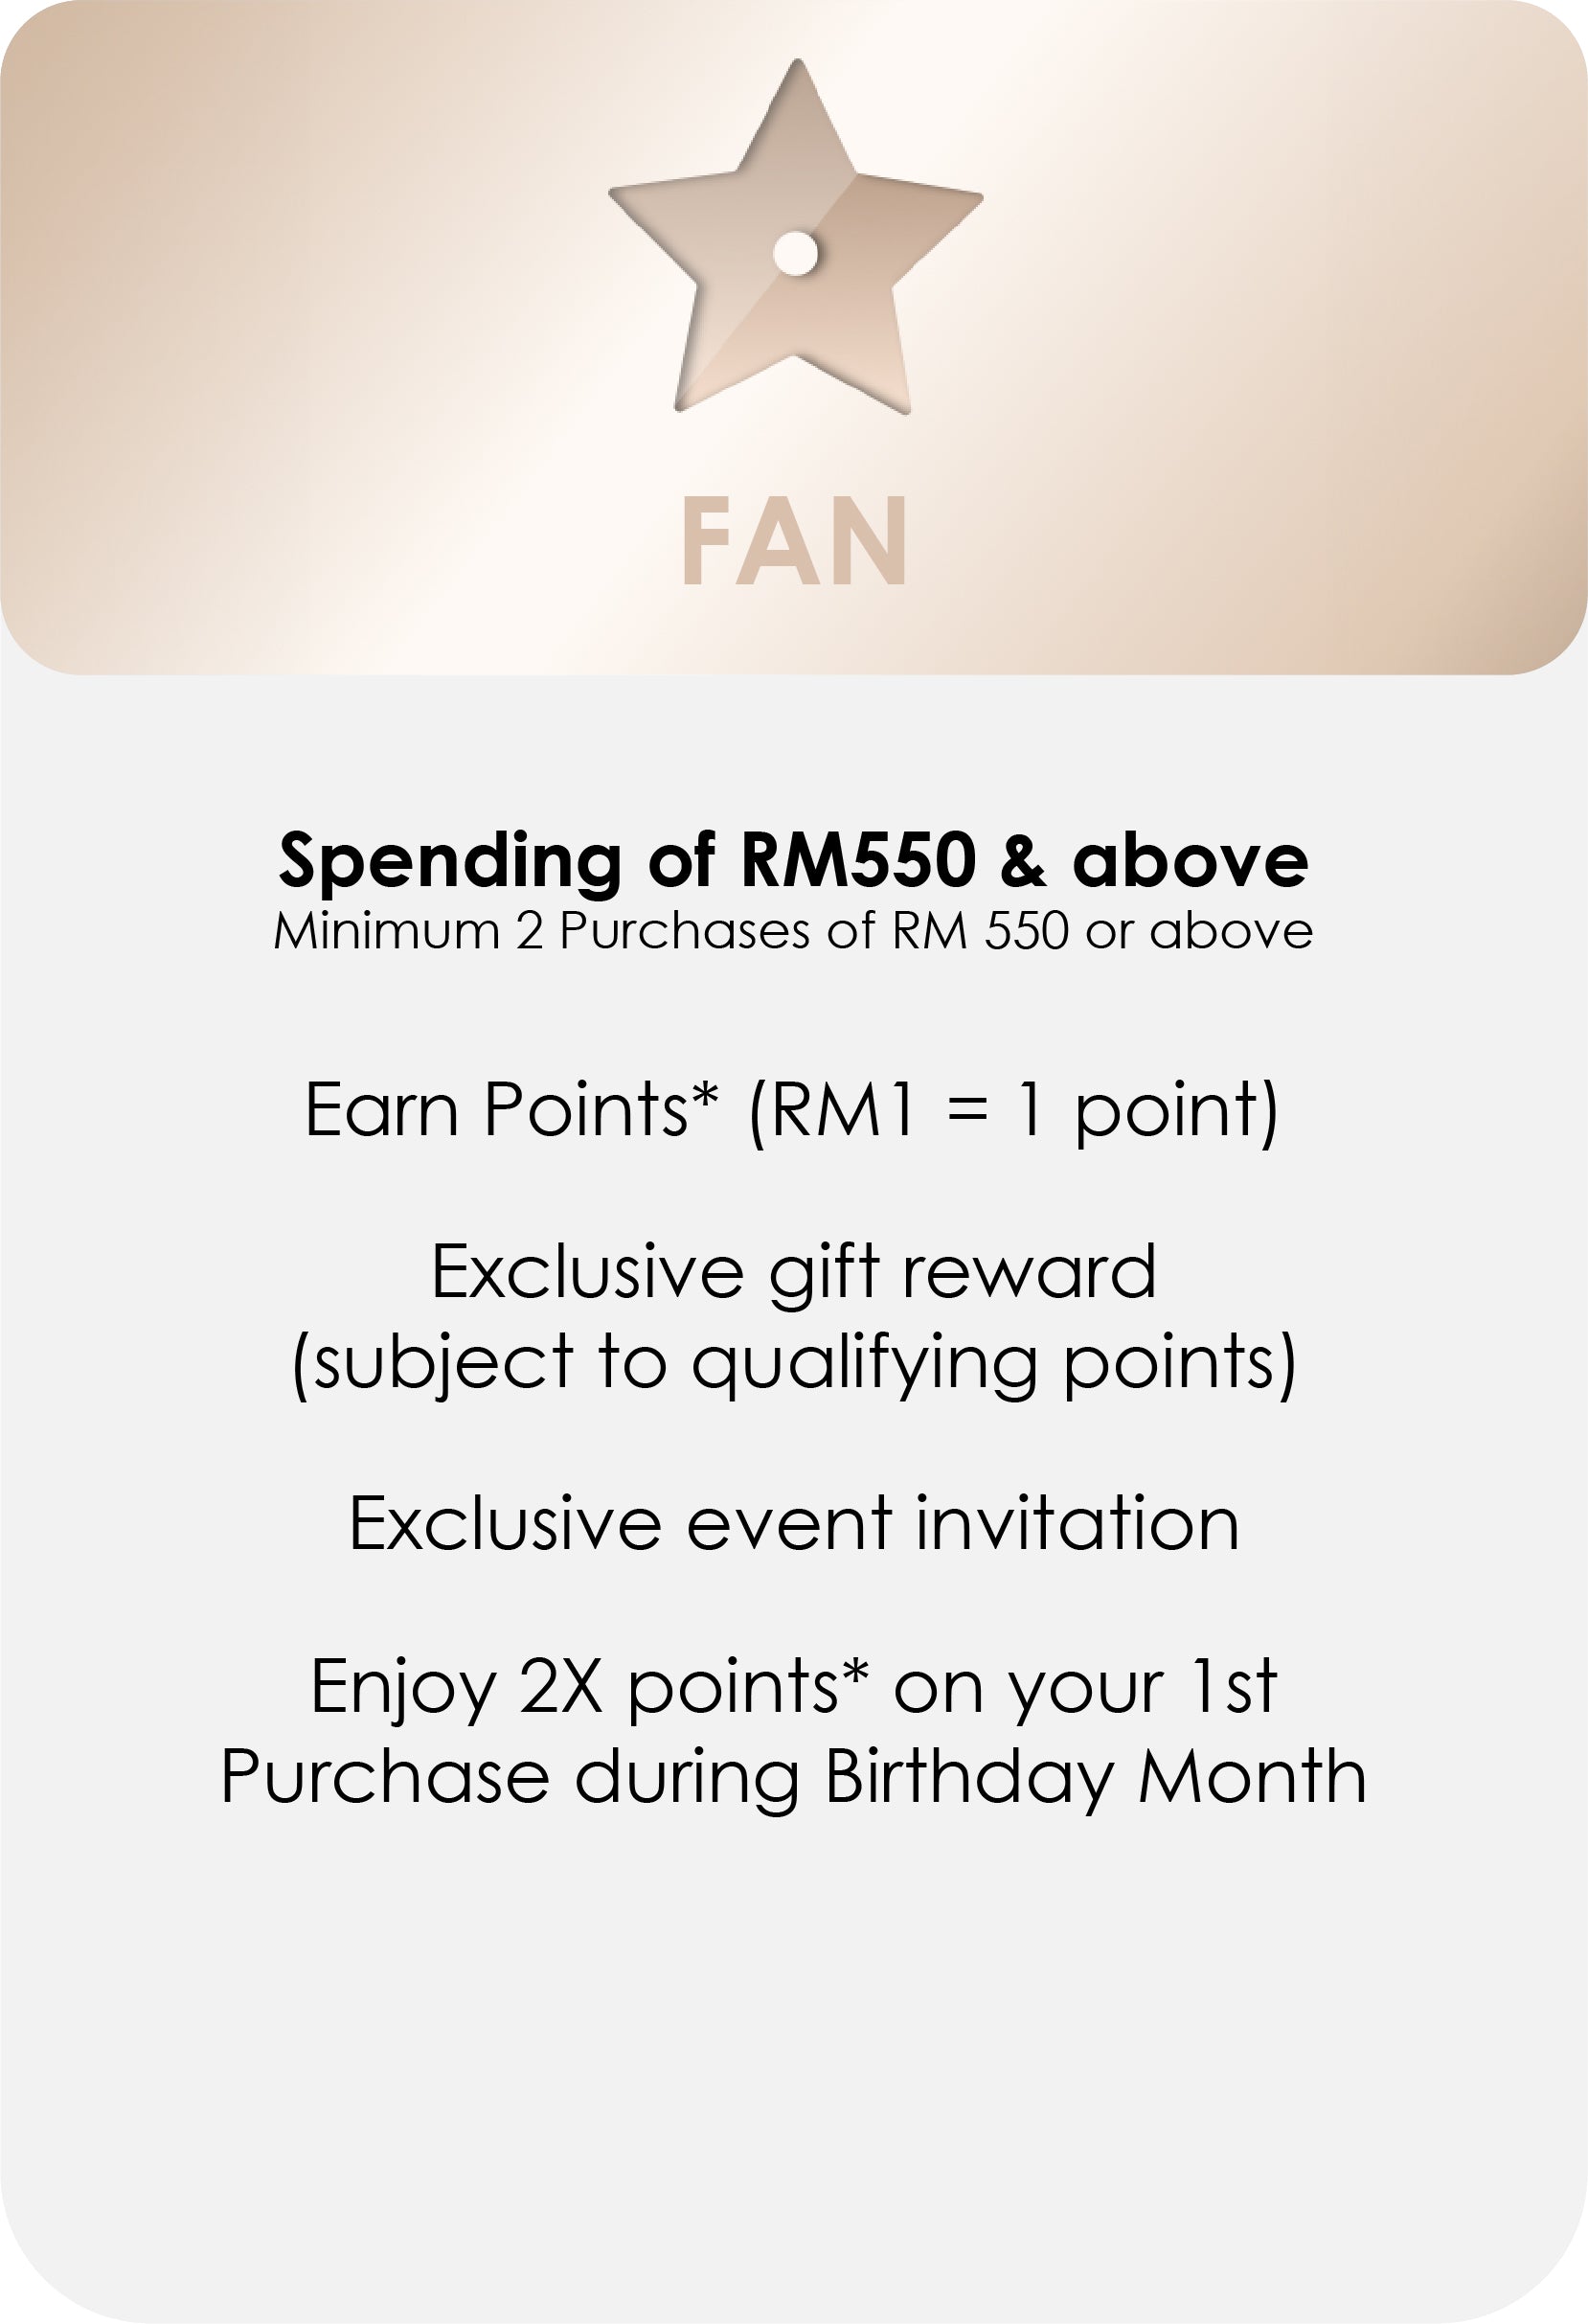 
                FAN
                Spending of RM550 & above
                Minimum 2 Purchases of RM 550 or above
                Earn Points* (RM1 = 1 point)
                Exclusive gift reward (subject to
                qualifying points)
                Exclusive event invitation
                Enjoy 2X points* on your 1st
                Purchase during Birthday Month
              